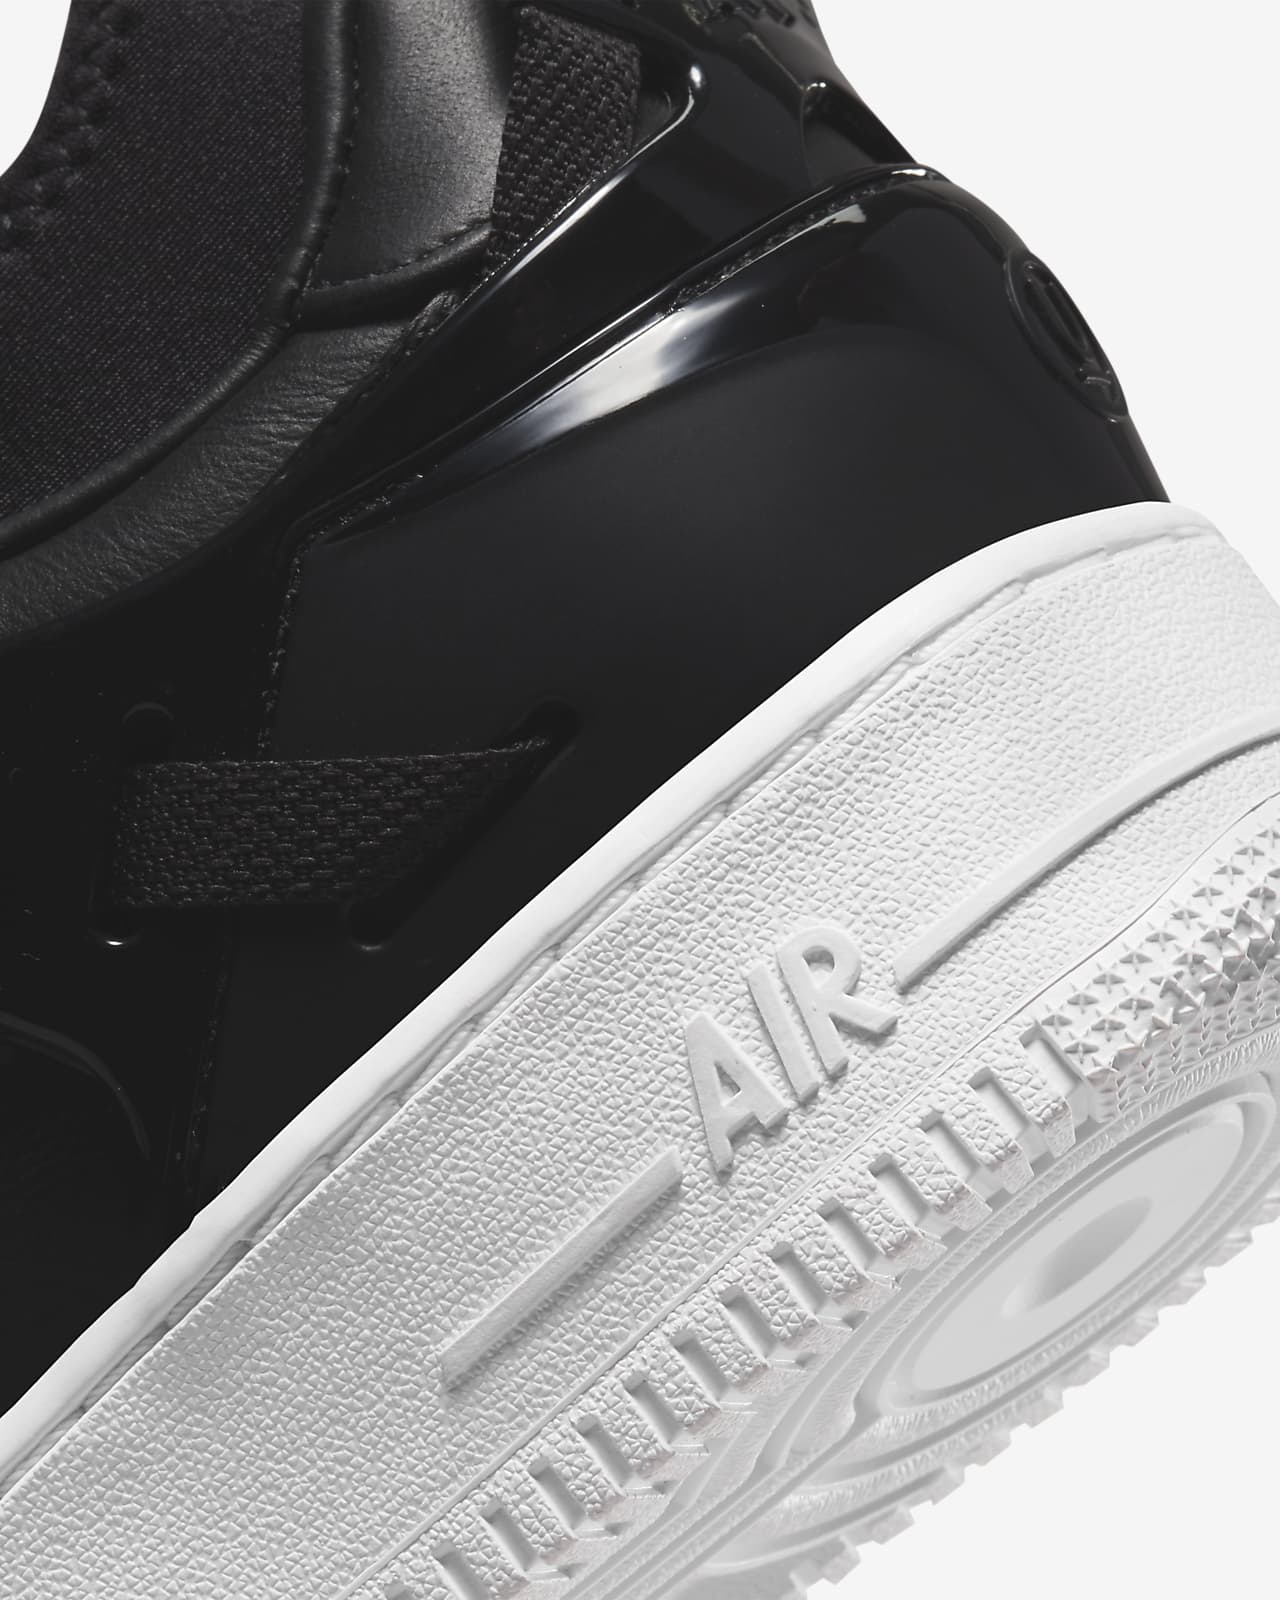 Nike Air Force 1 Low Undercover Black 新品